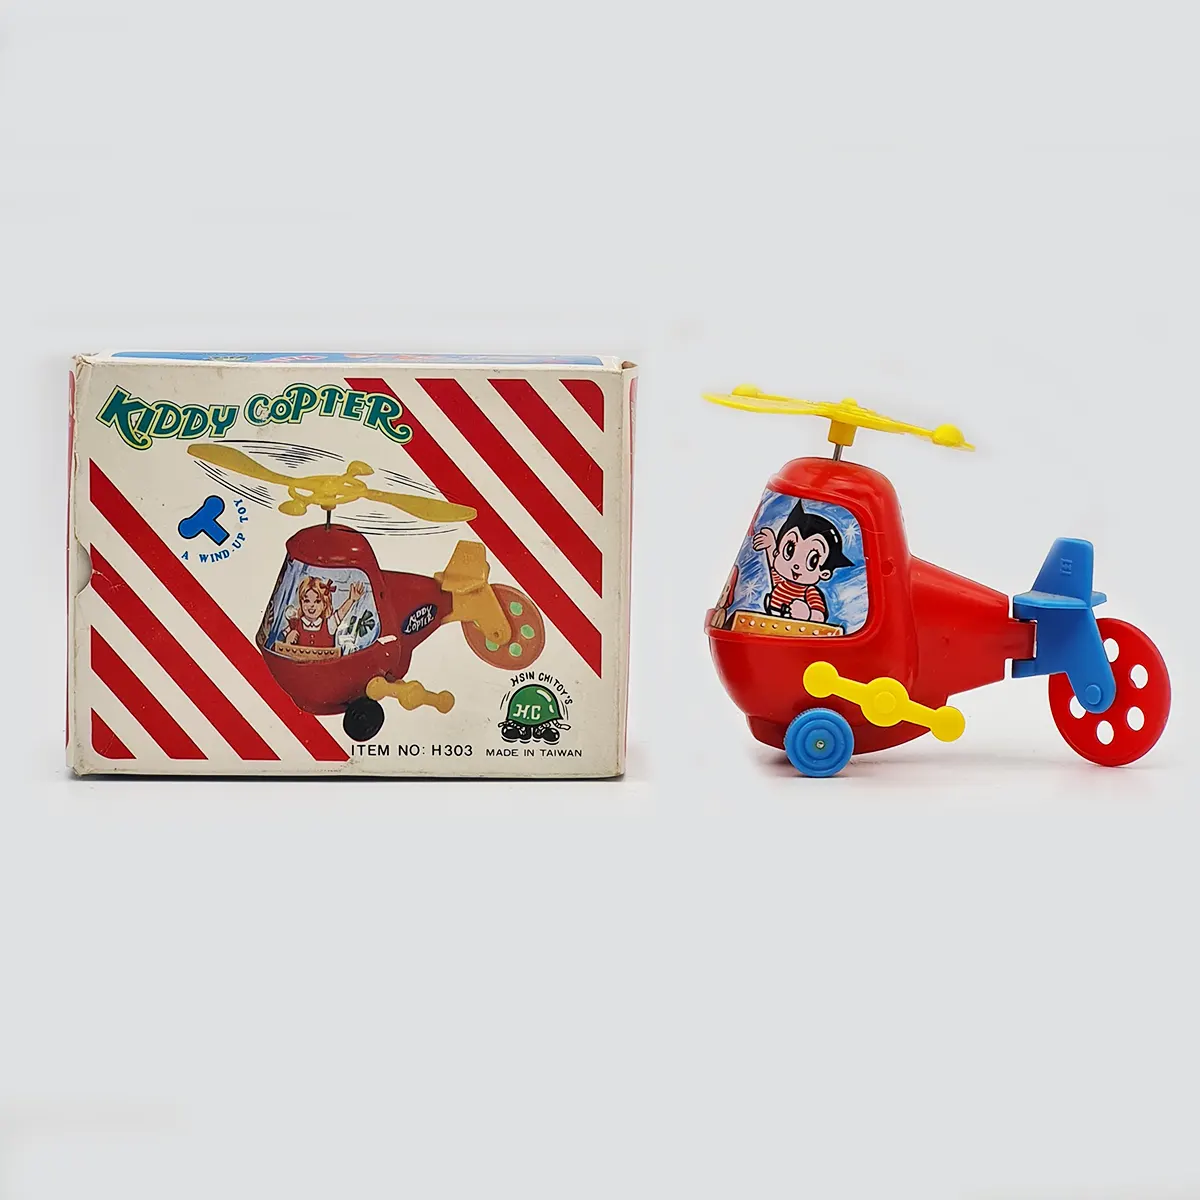 Kiddy Copter 2